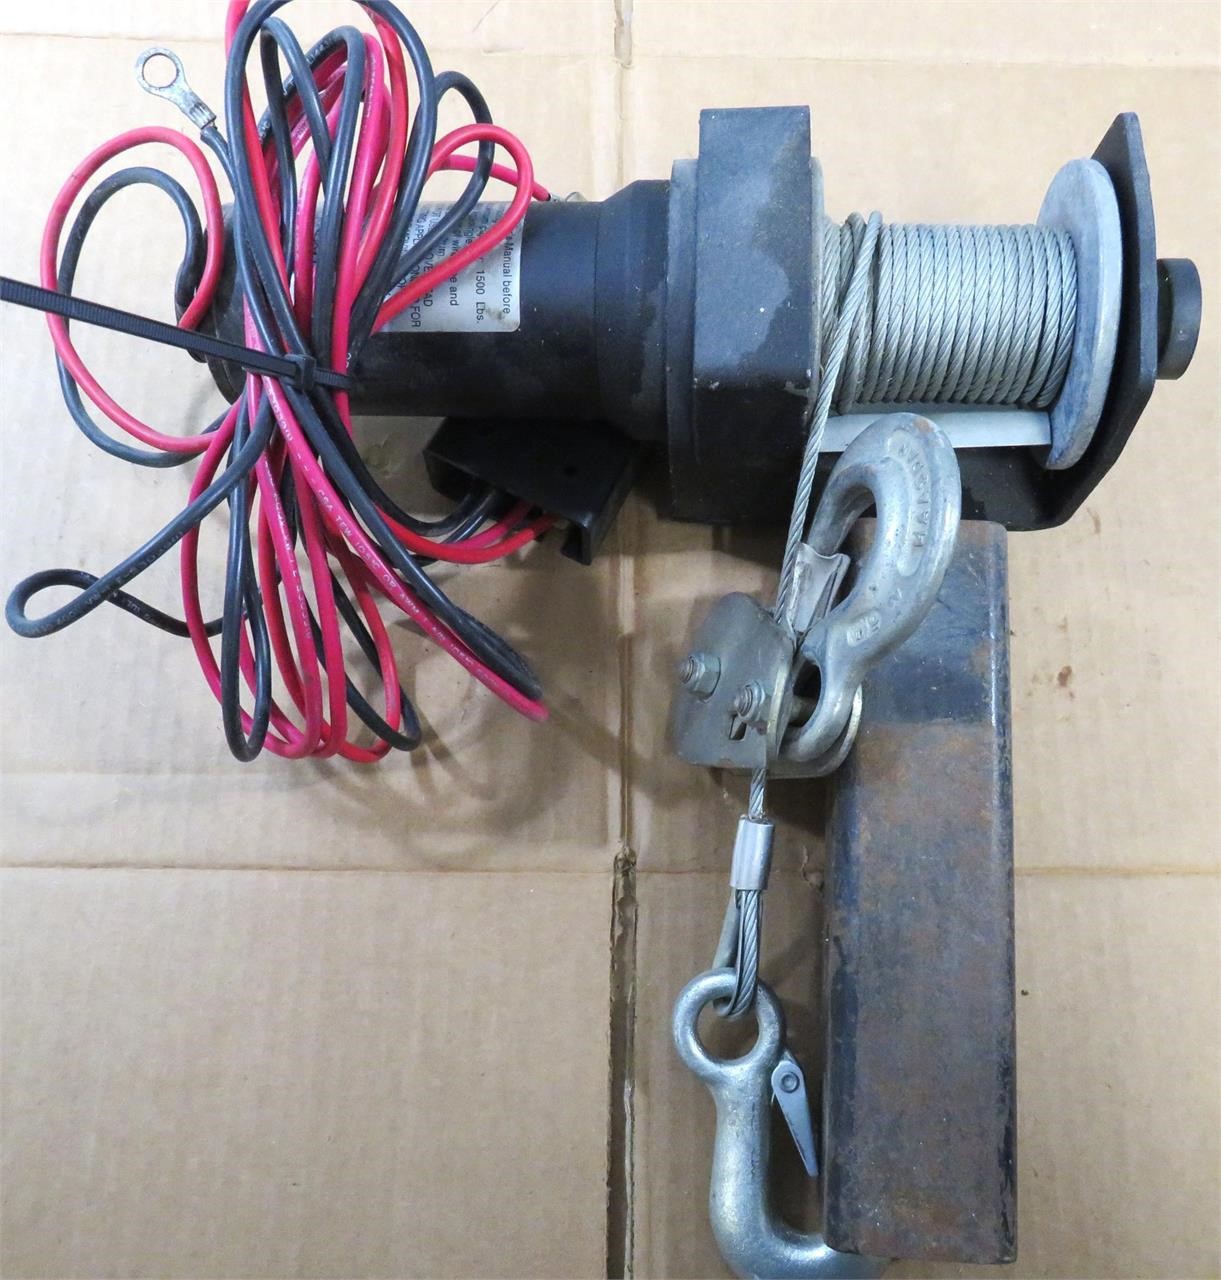 T1500 12 V DC ELECTRIC SUPERWINCH-TESTED & WORKS